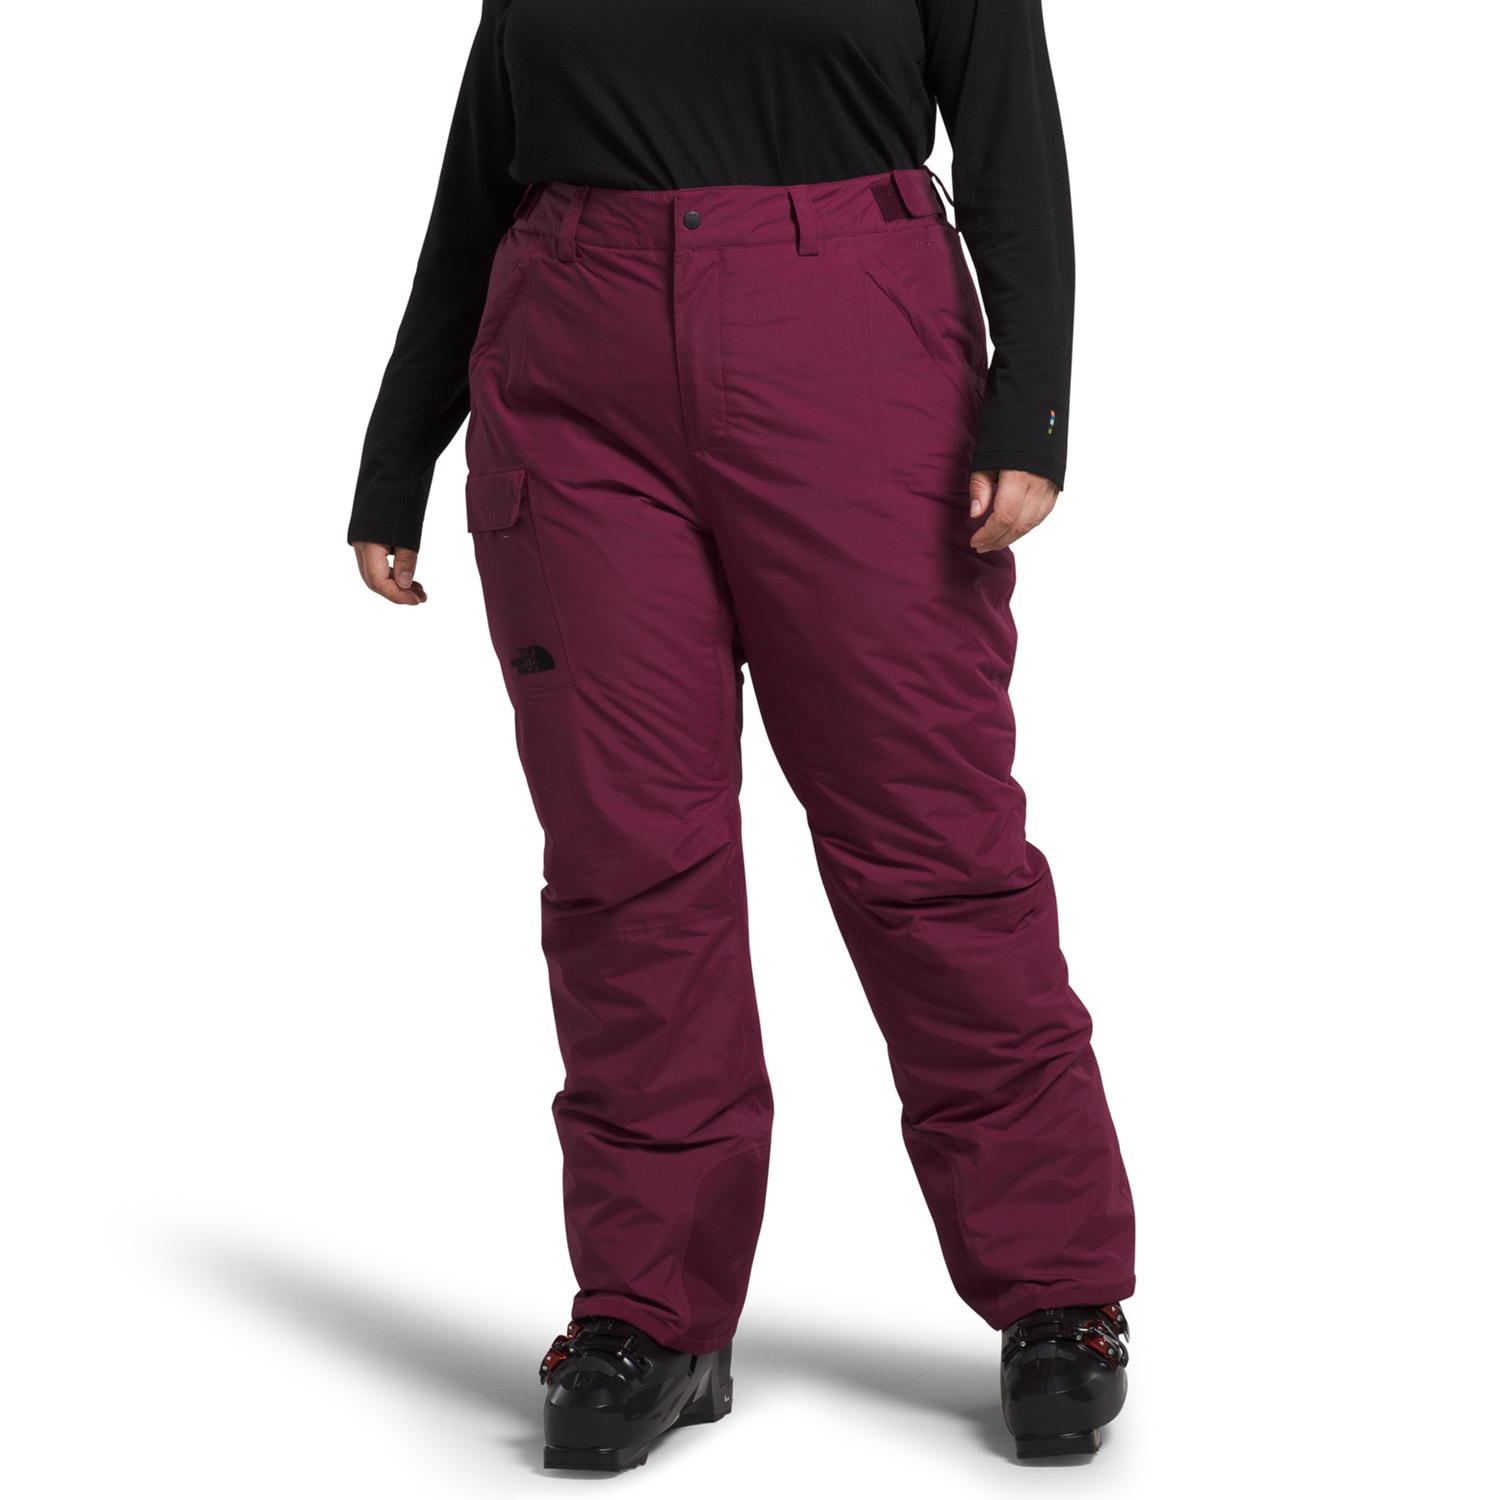 Брюки The North Face Freedom Insulated Plus, цвет Boysenberry брюки the north face freedom insulated plus short цвет boysenberry